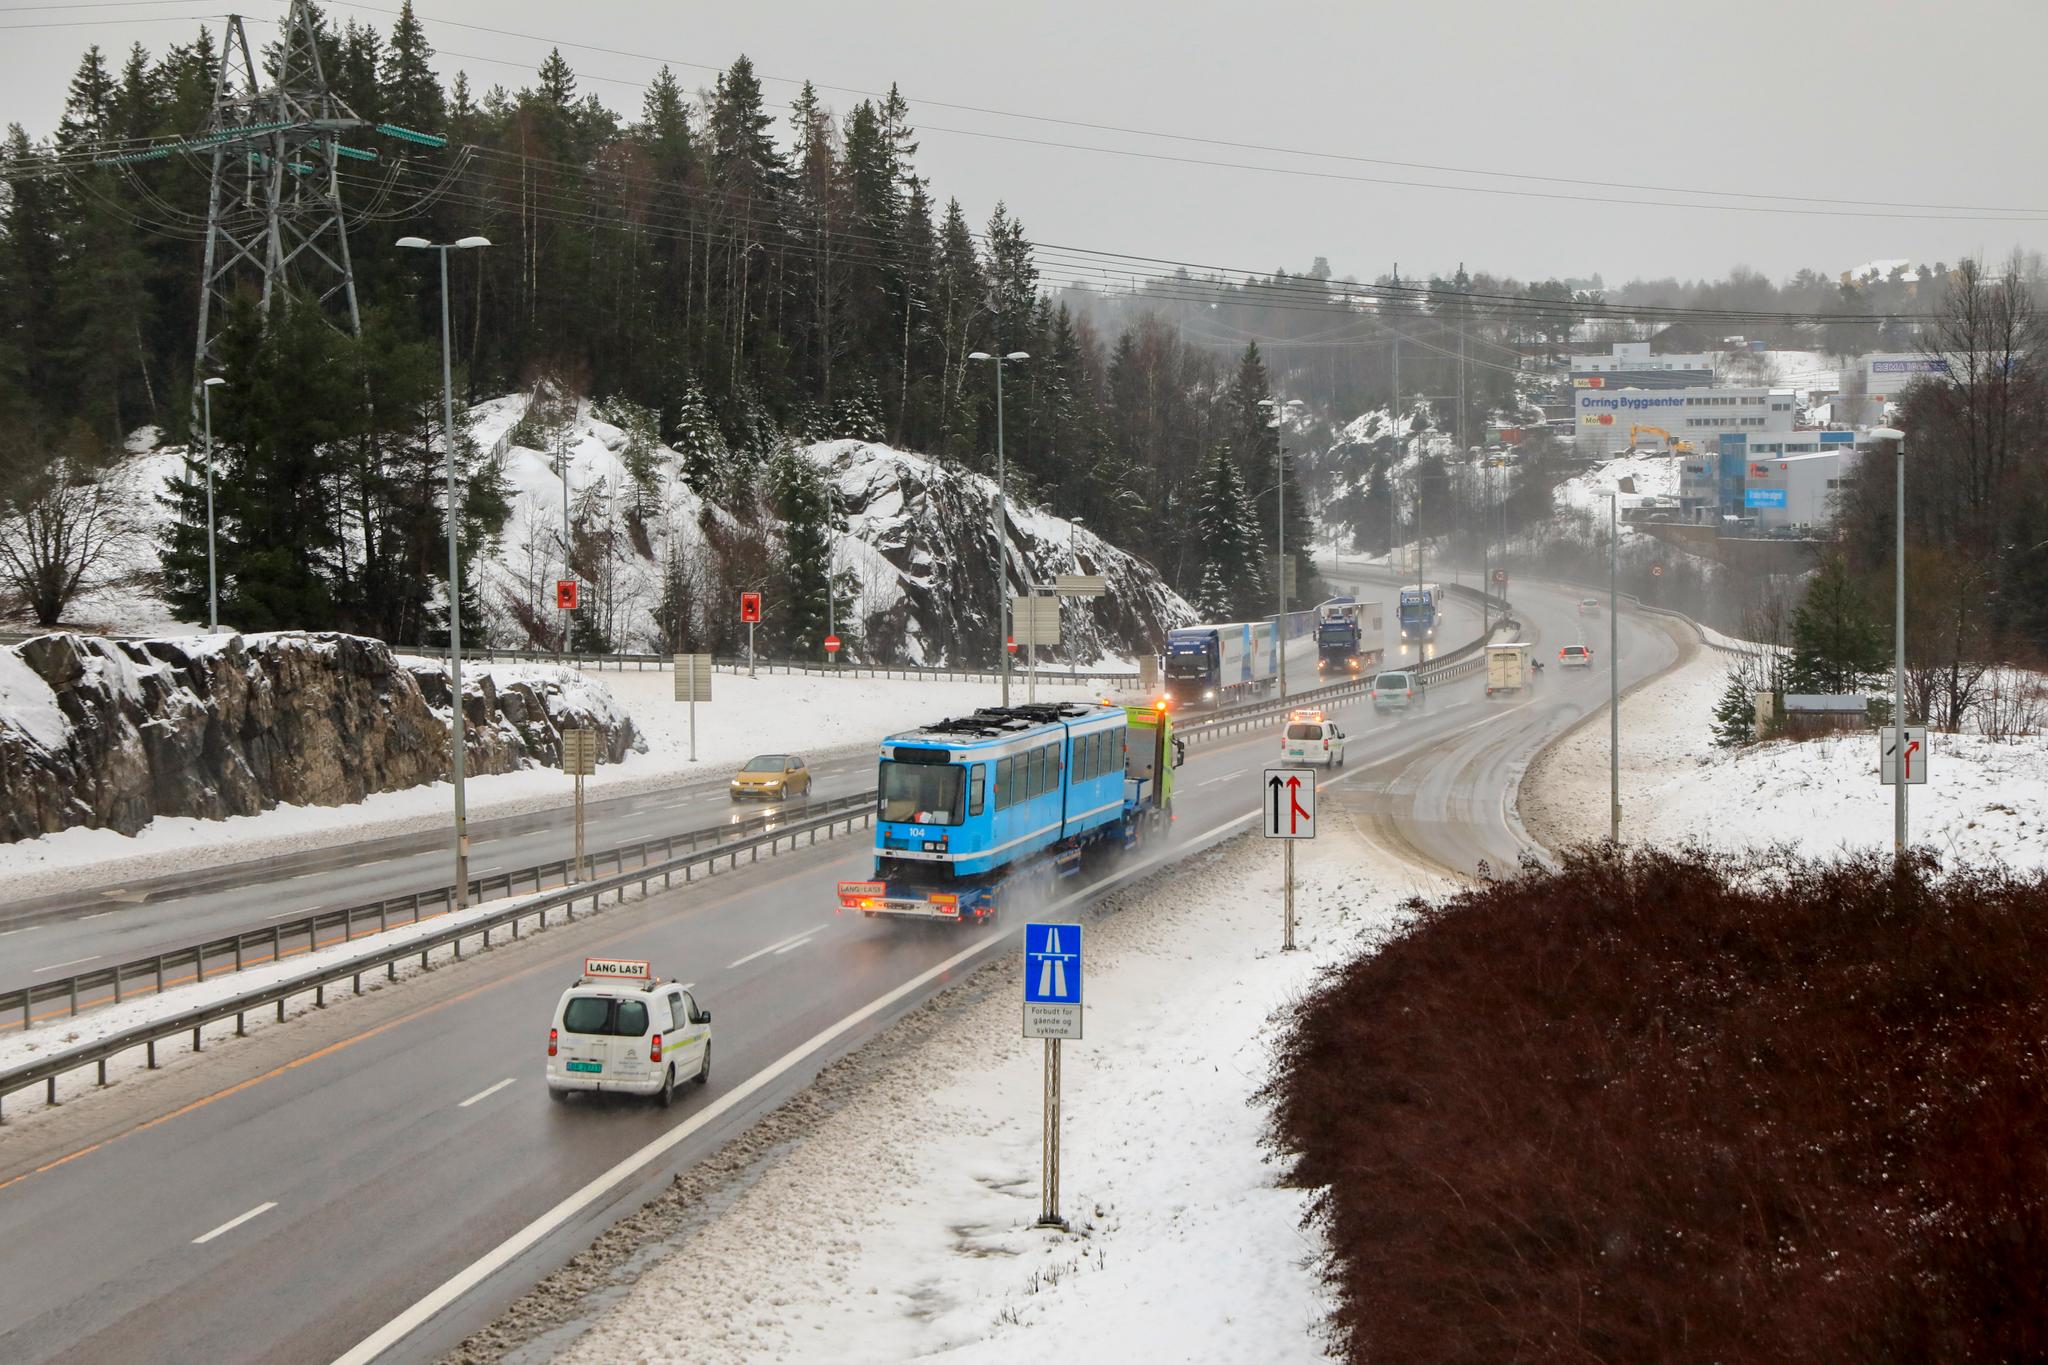 This is where the last journey of the Oslo tram goes